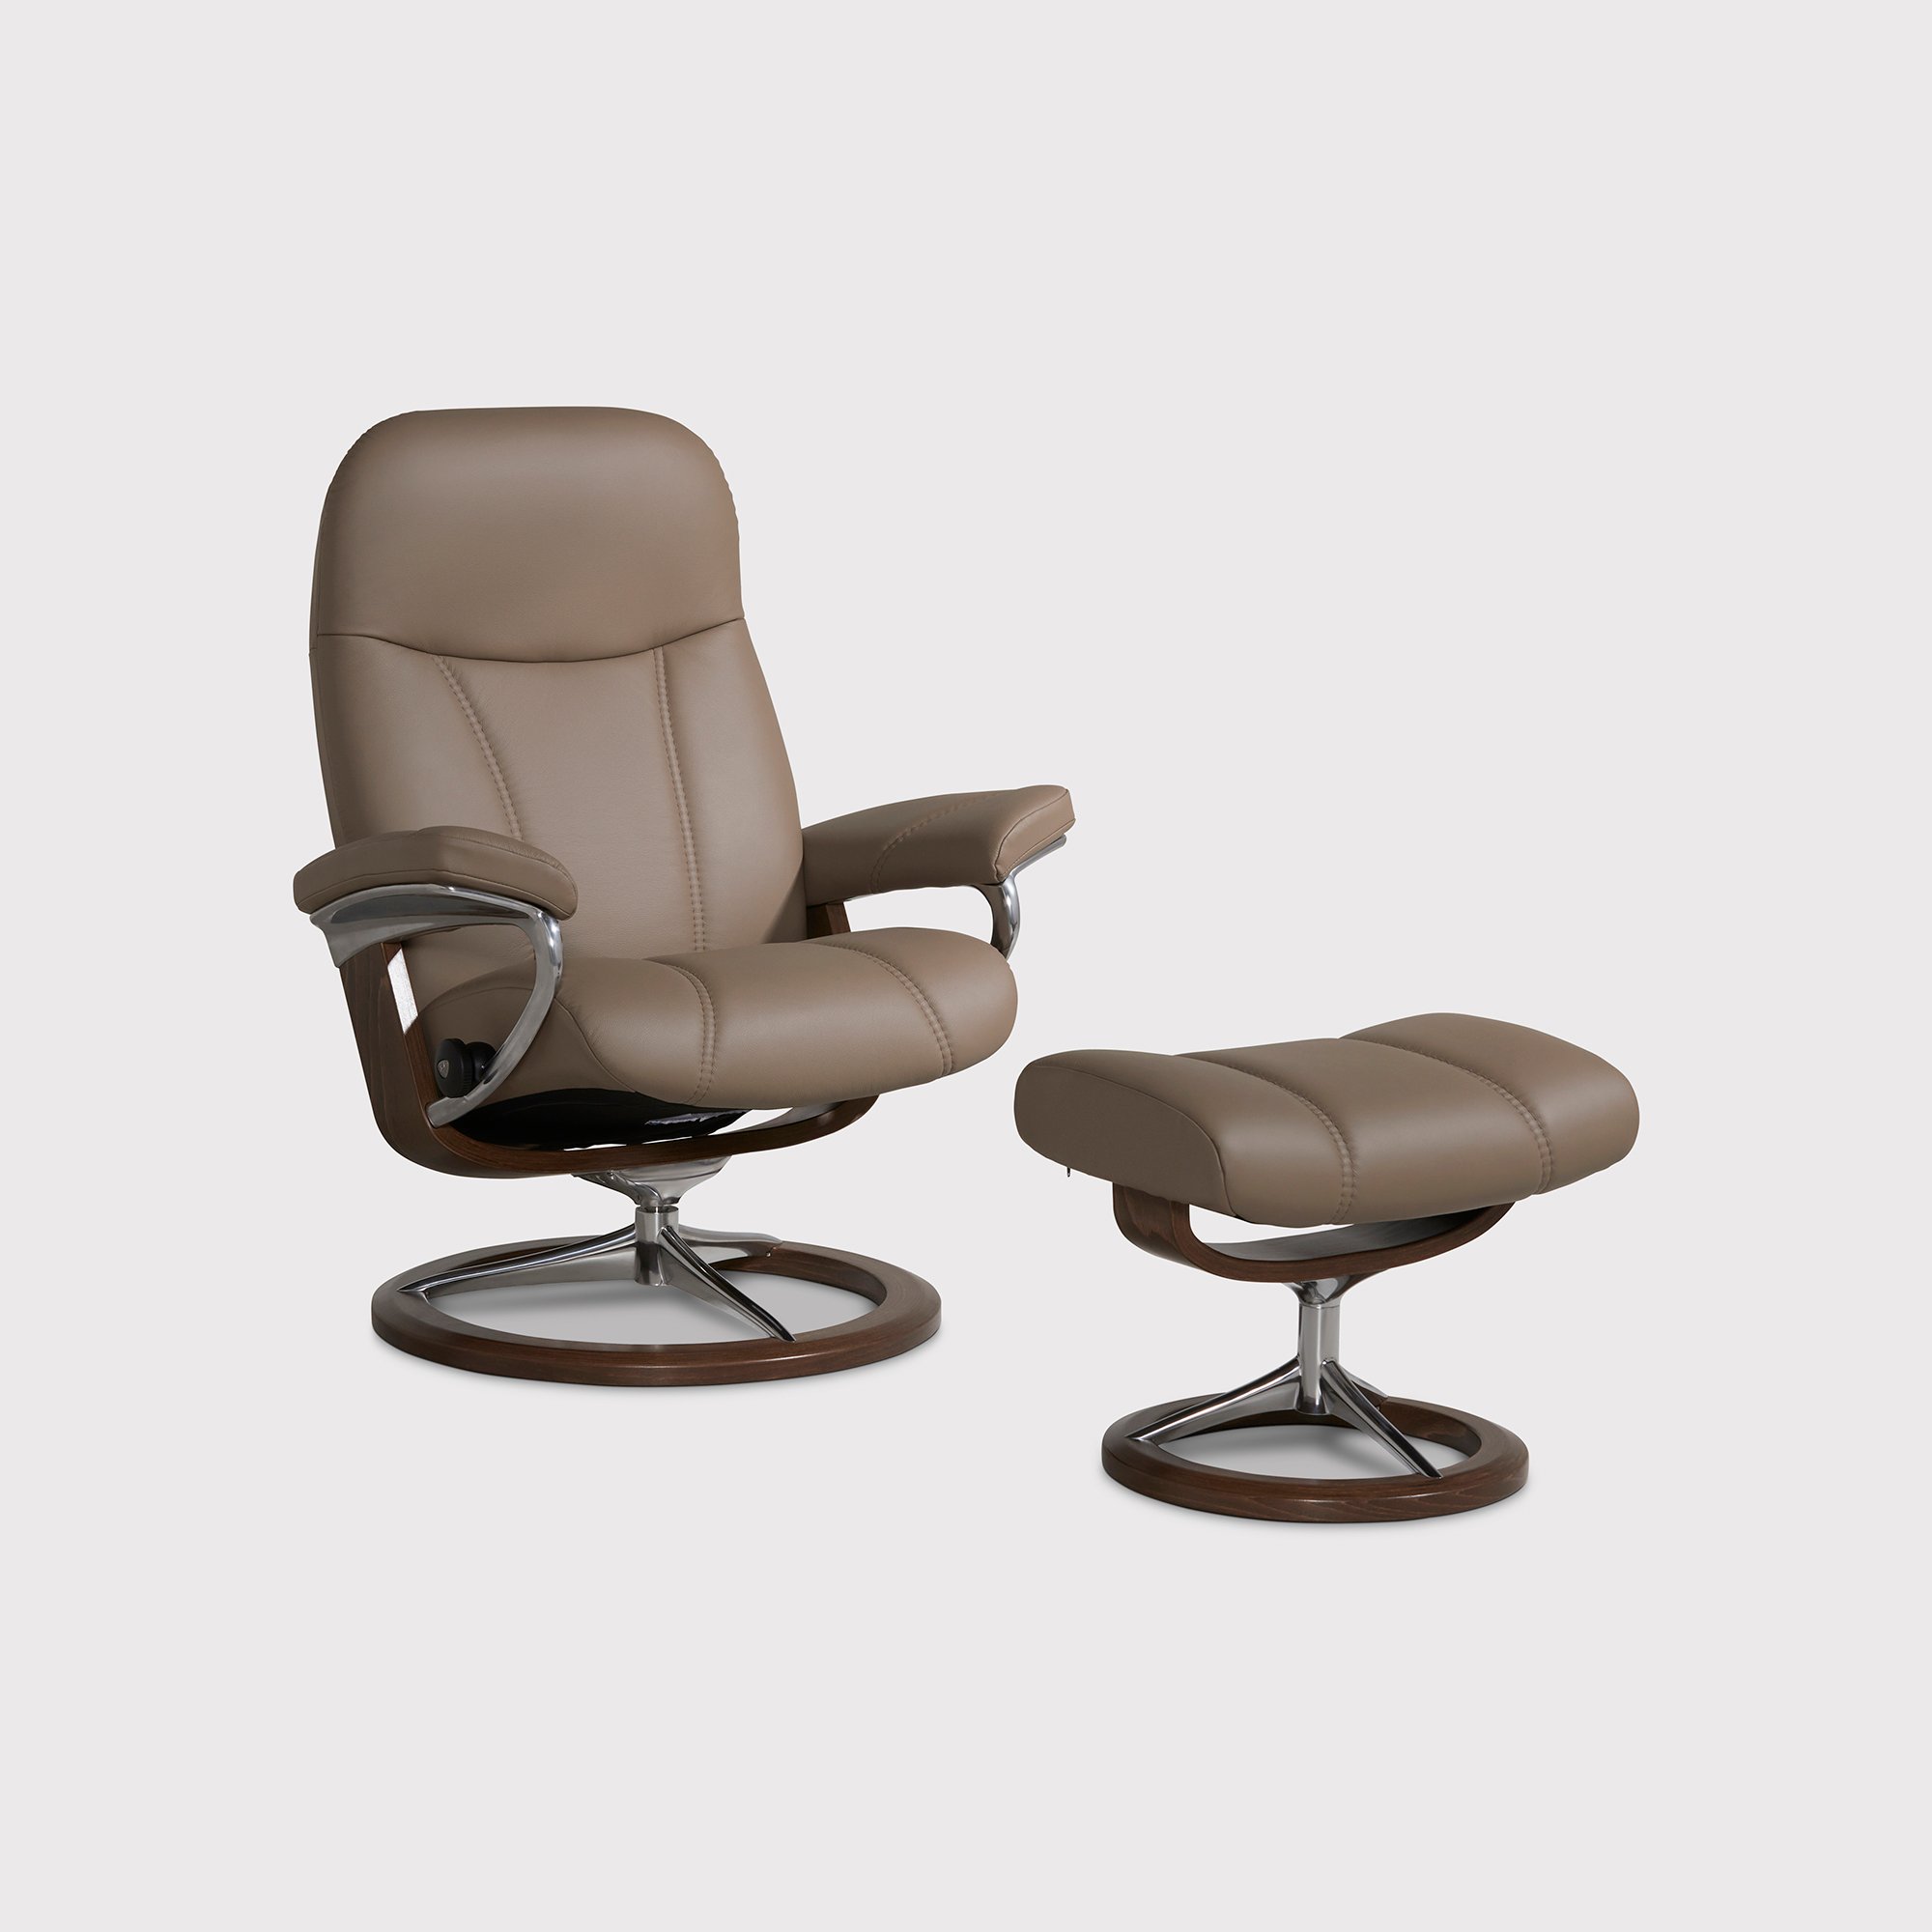 Stressless Consul Medium Recliner Chair & Stool, Brown Leather | Barker & Stonehouse